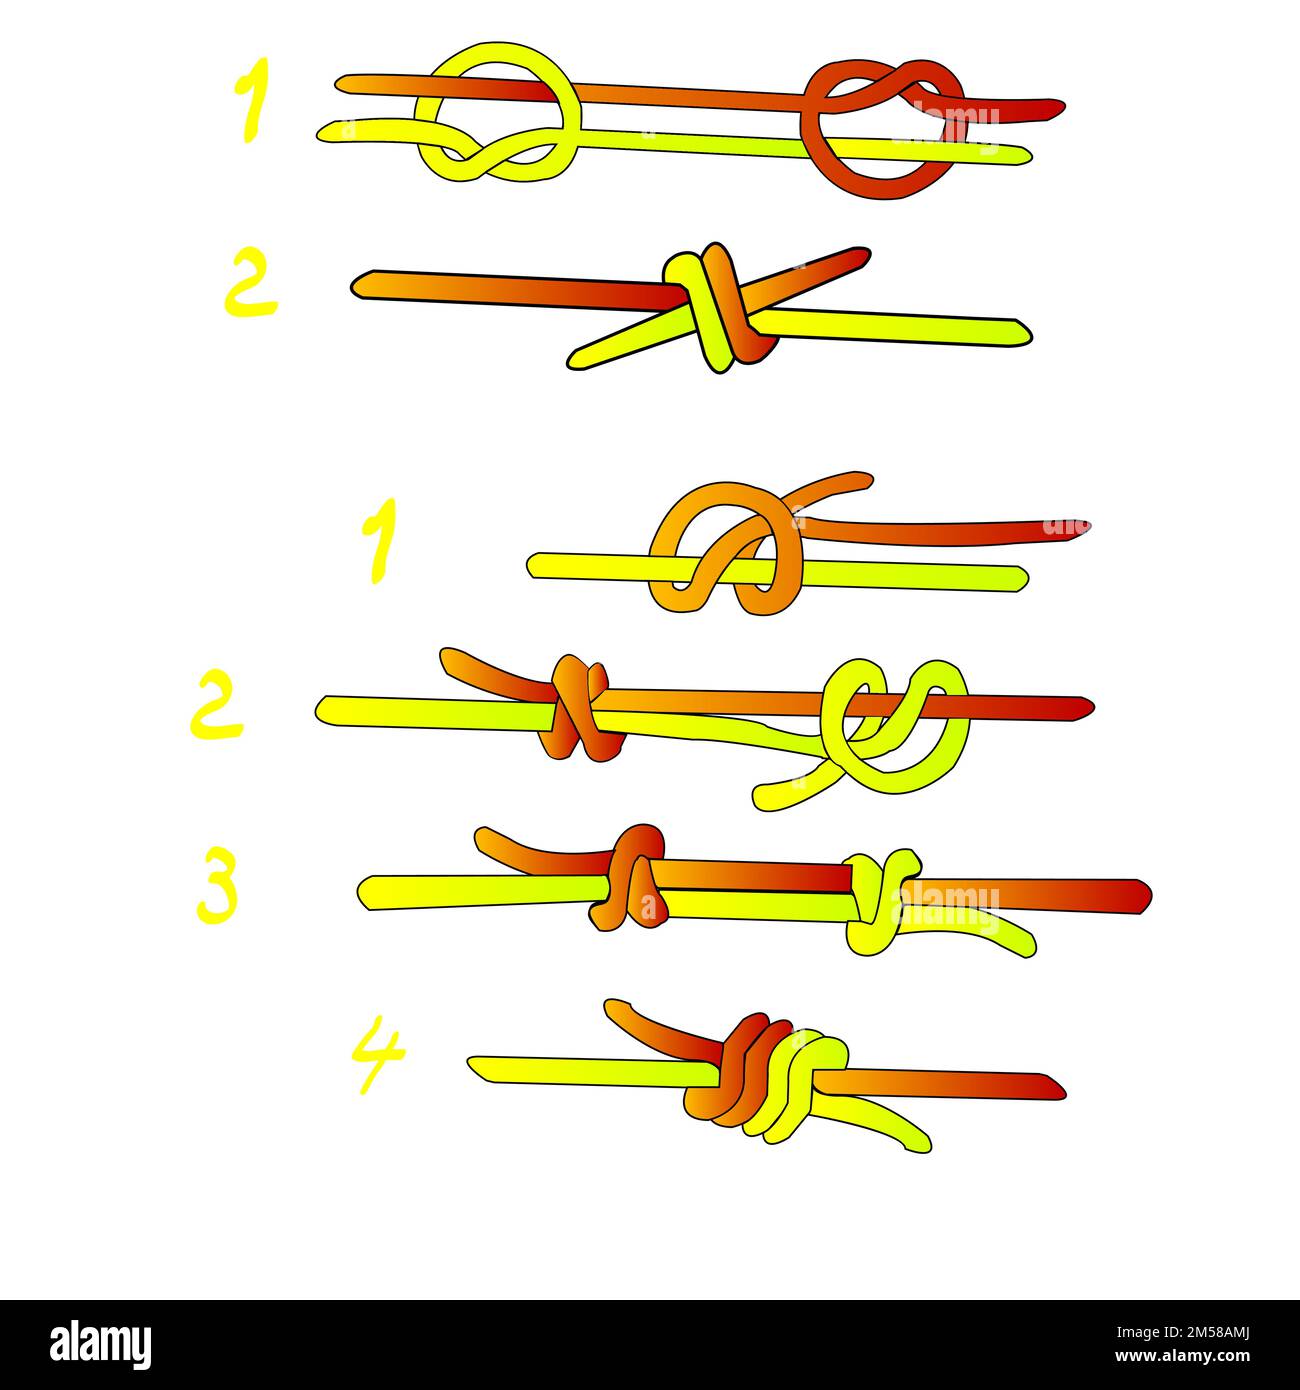 Fisherman`s knot and Double Fisherman`s knot; vector illustration